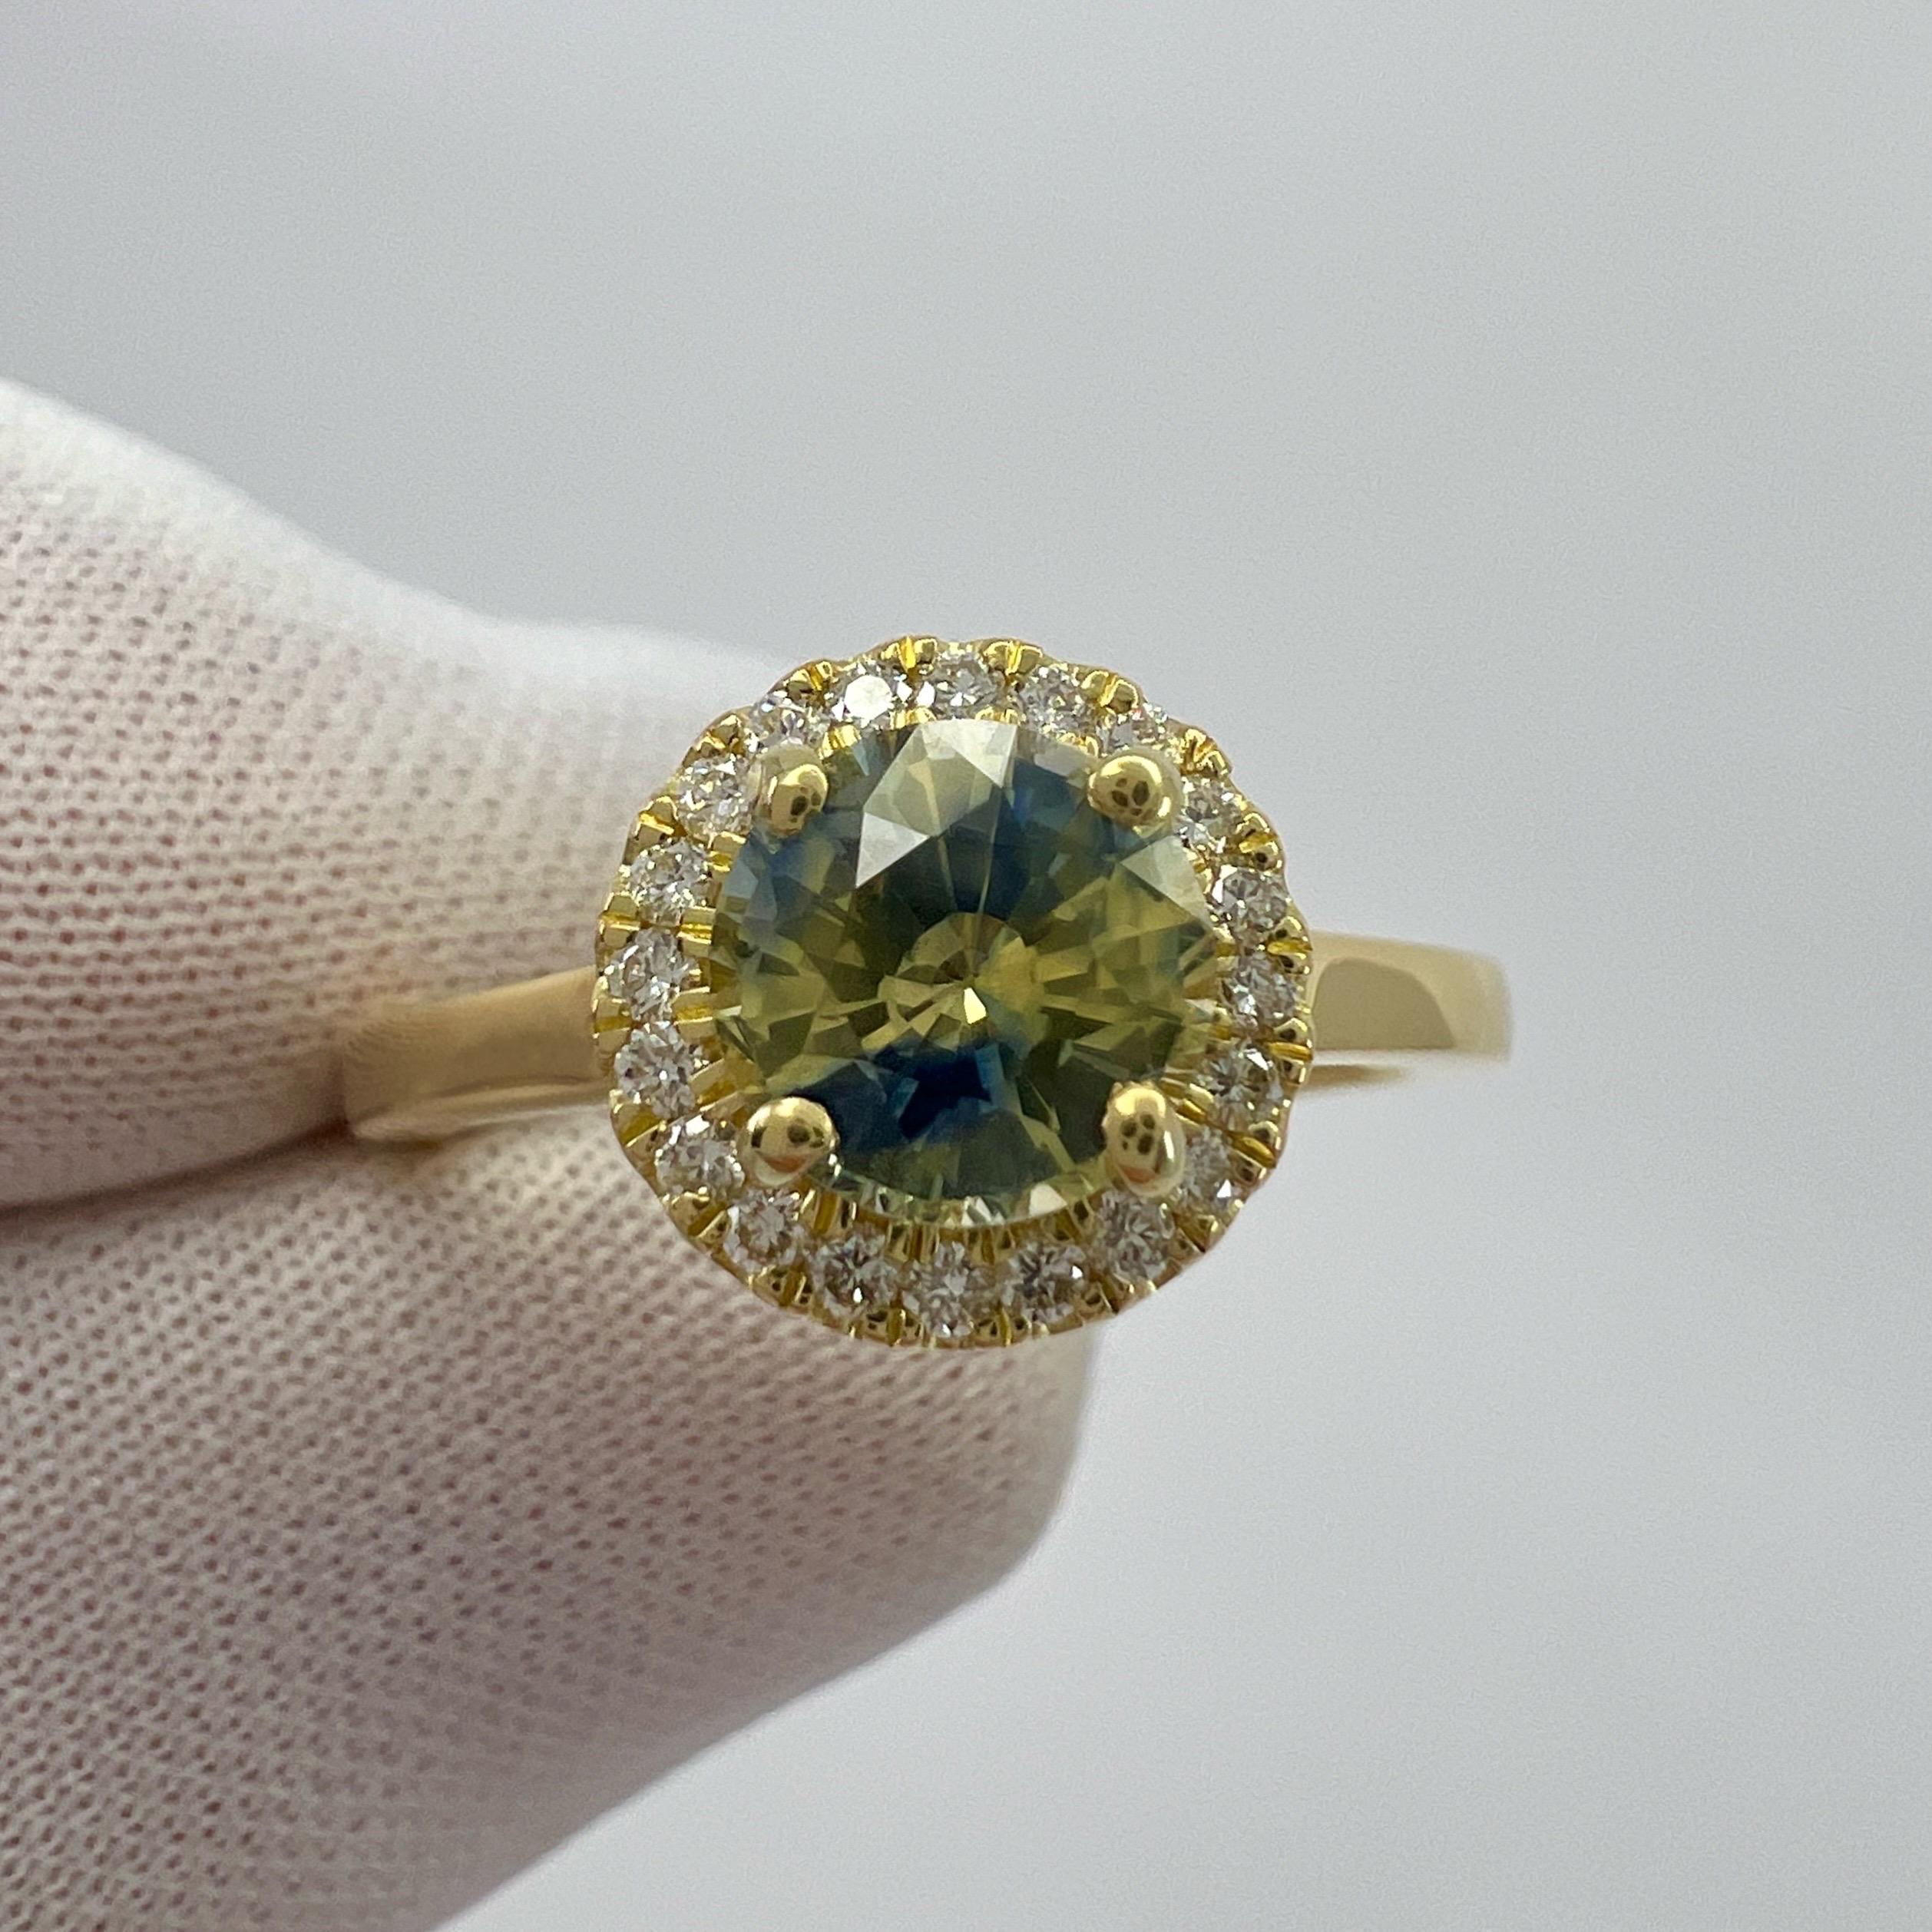 Unique Untreated Bi Colour Sapphire And Diamond 18k Yellow Gold Halo Ring. ITSIT.

Rare 1.20 Carat sapphire with a stunning blue and yellow bi colour - parti colour effect. Very rare and beautiful to see, similarly seen in ametrine and watermelon